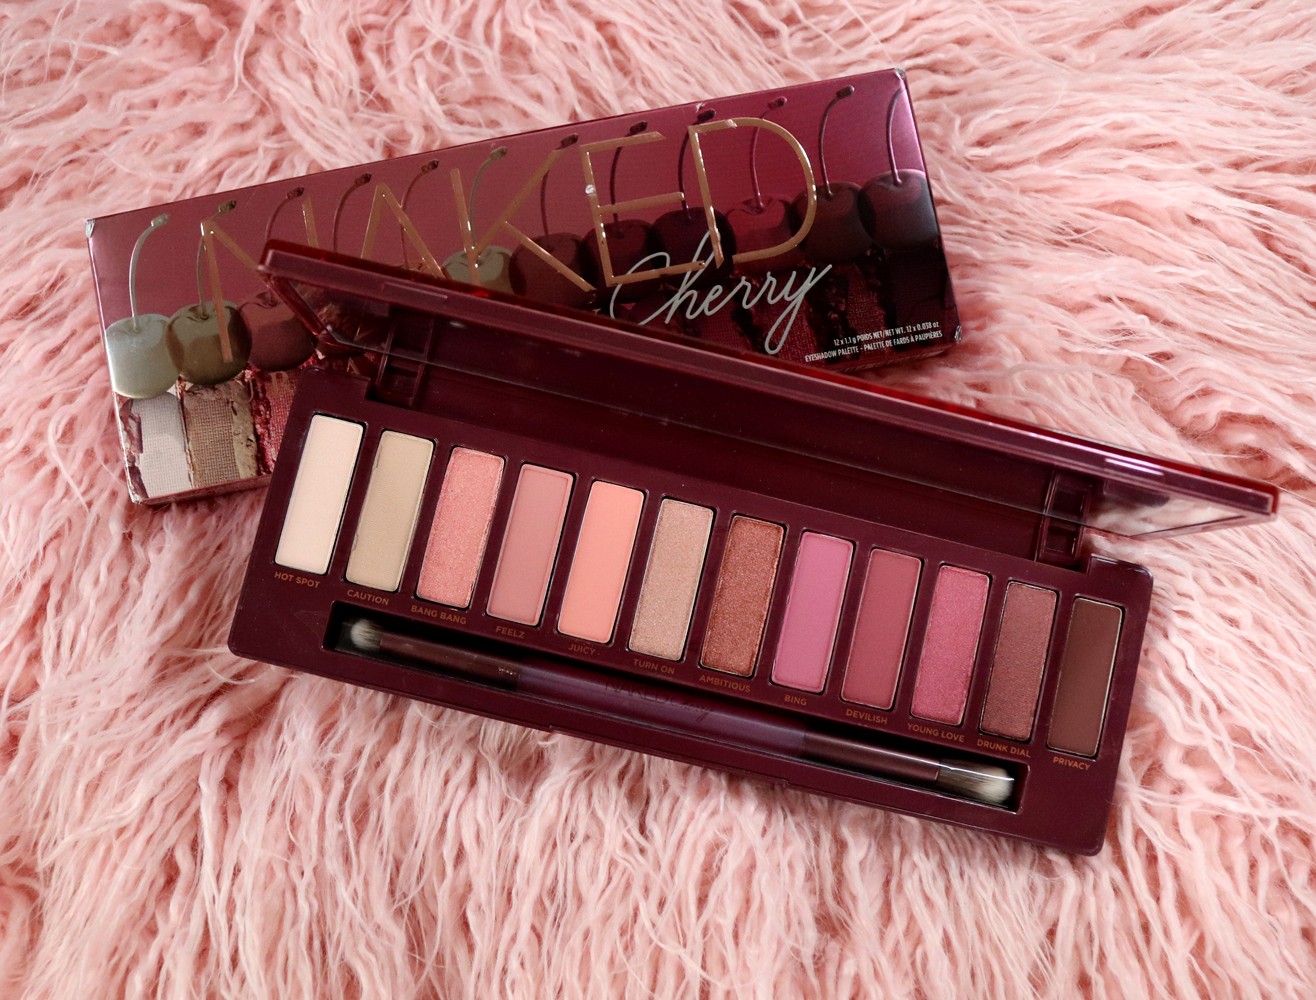 Cruelty Free Gift Guide - Urban Decay Naked Cherry Palette